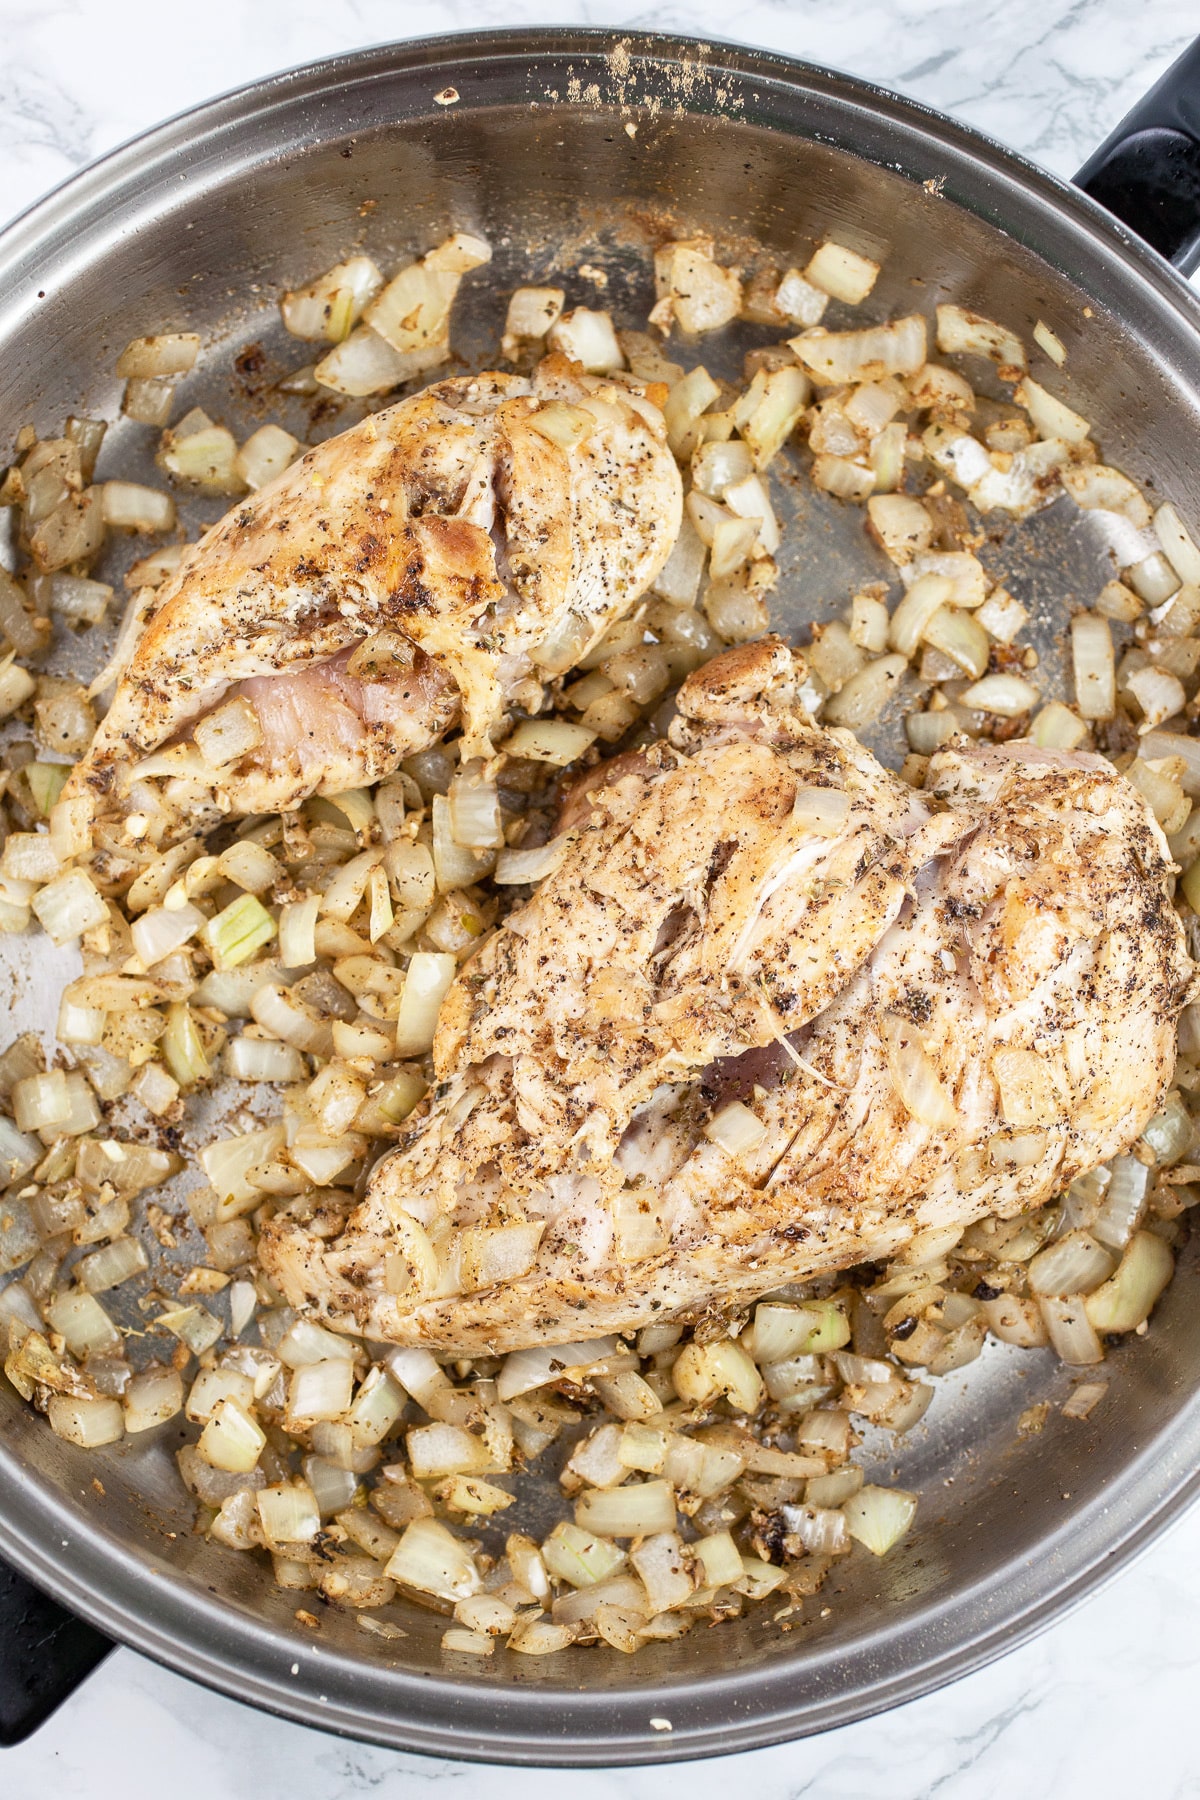 Chicken breasts sautéed with minced garlic ,onions, and spices in skillet.